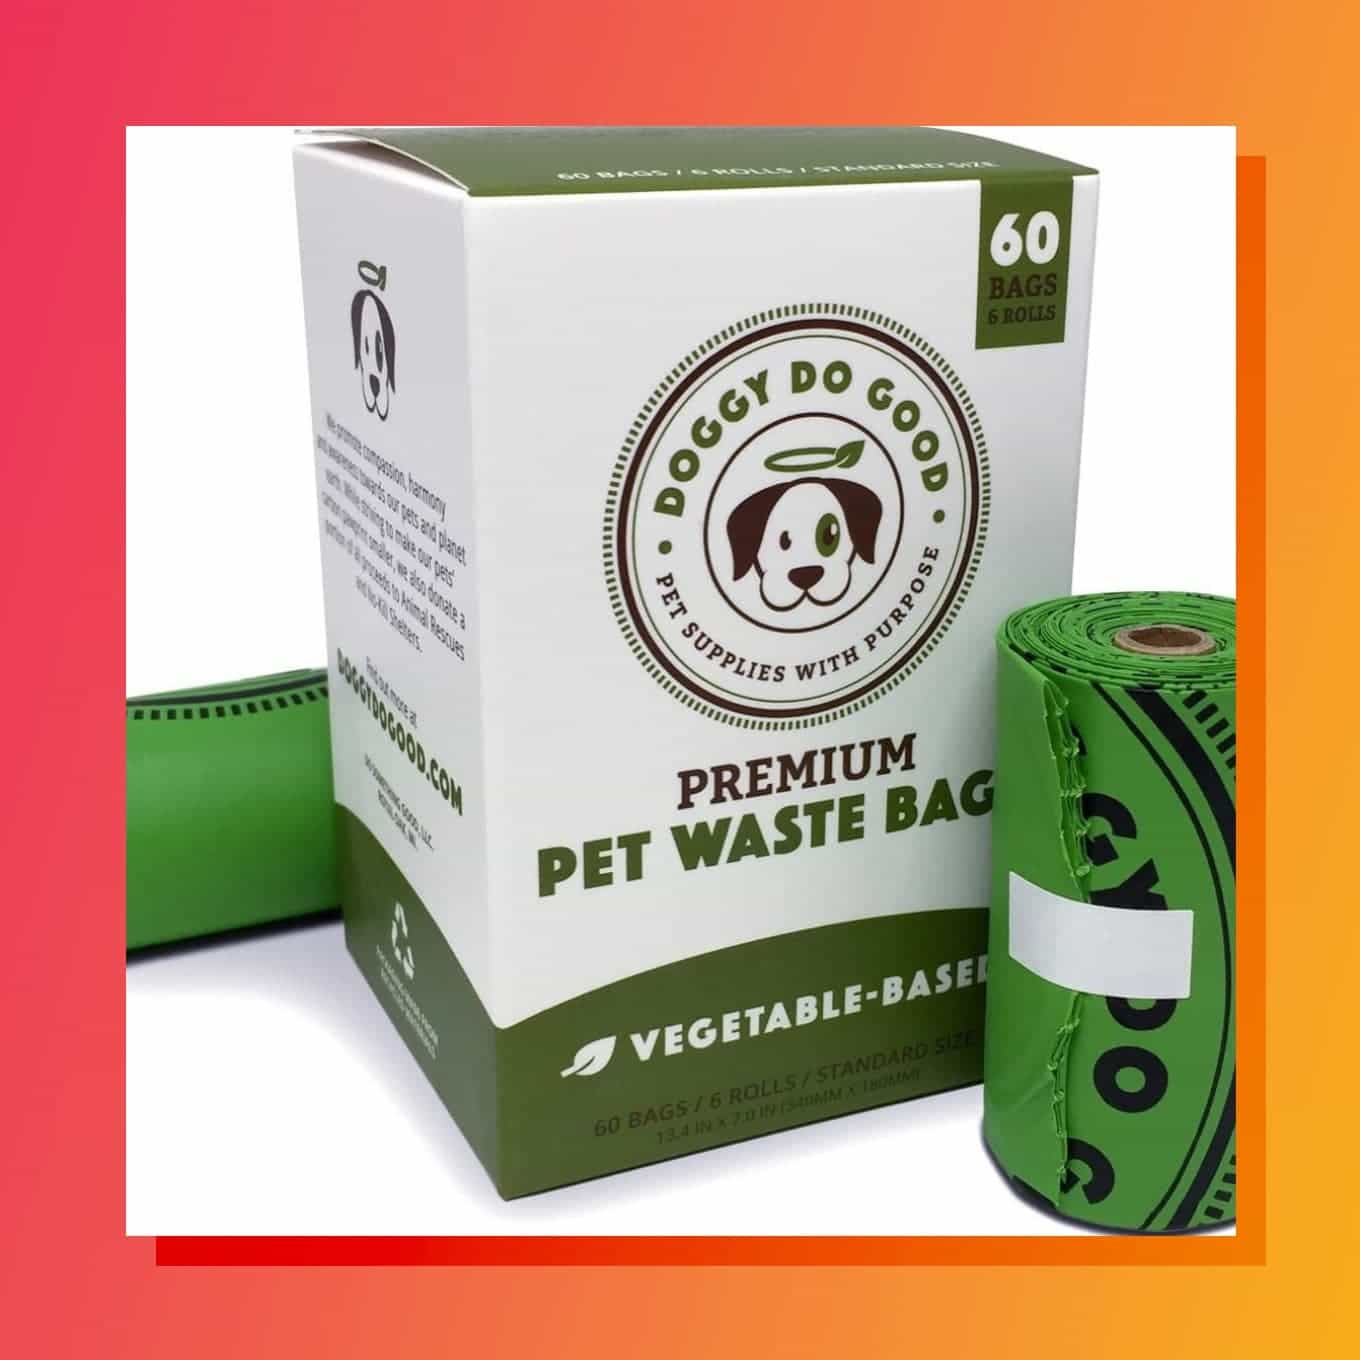 Box of Doggy Do Good compostable pet waste bags